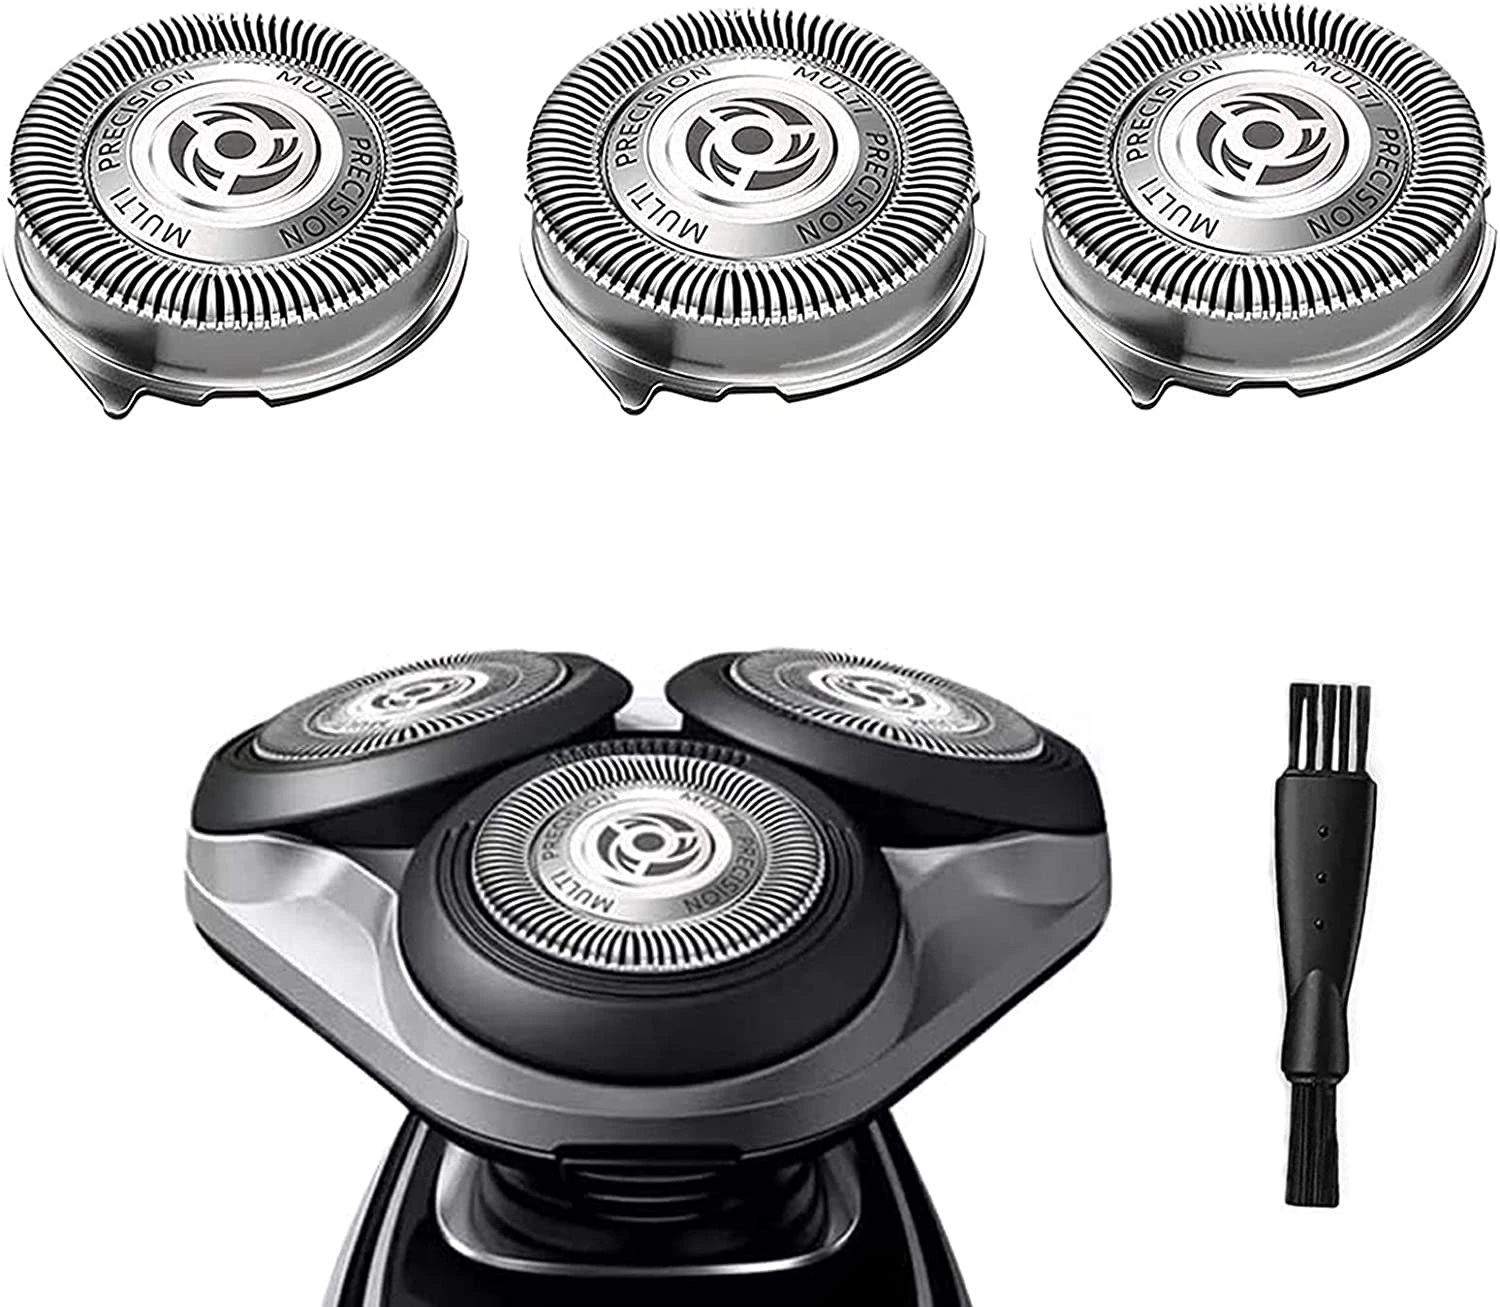 SH50/52 Replacement Heads for Philips Norelco Series 5000 Shavers, SH50 Electric Heads Blades Compatible with Phillips Shaver Series 5000 (S5xxx), AquaTouch (S5xxx), PowerTouch (PT8xx, PT7xx), 3-Pack